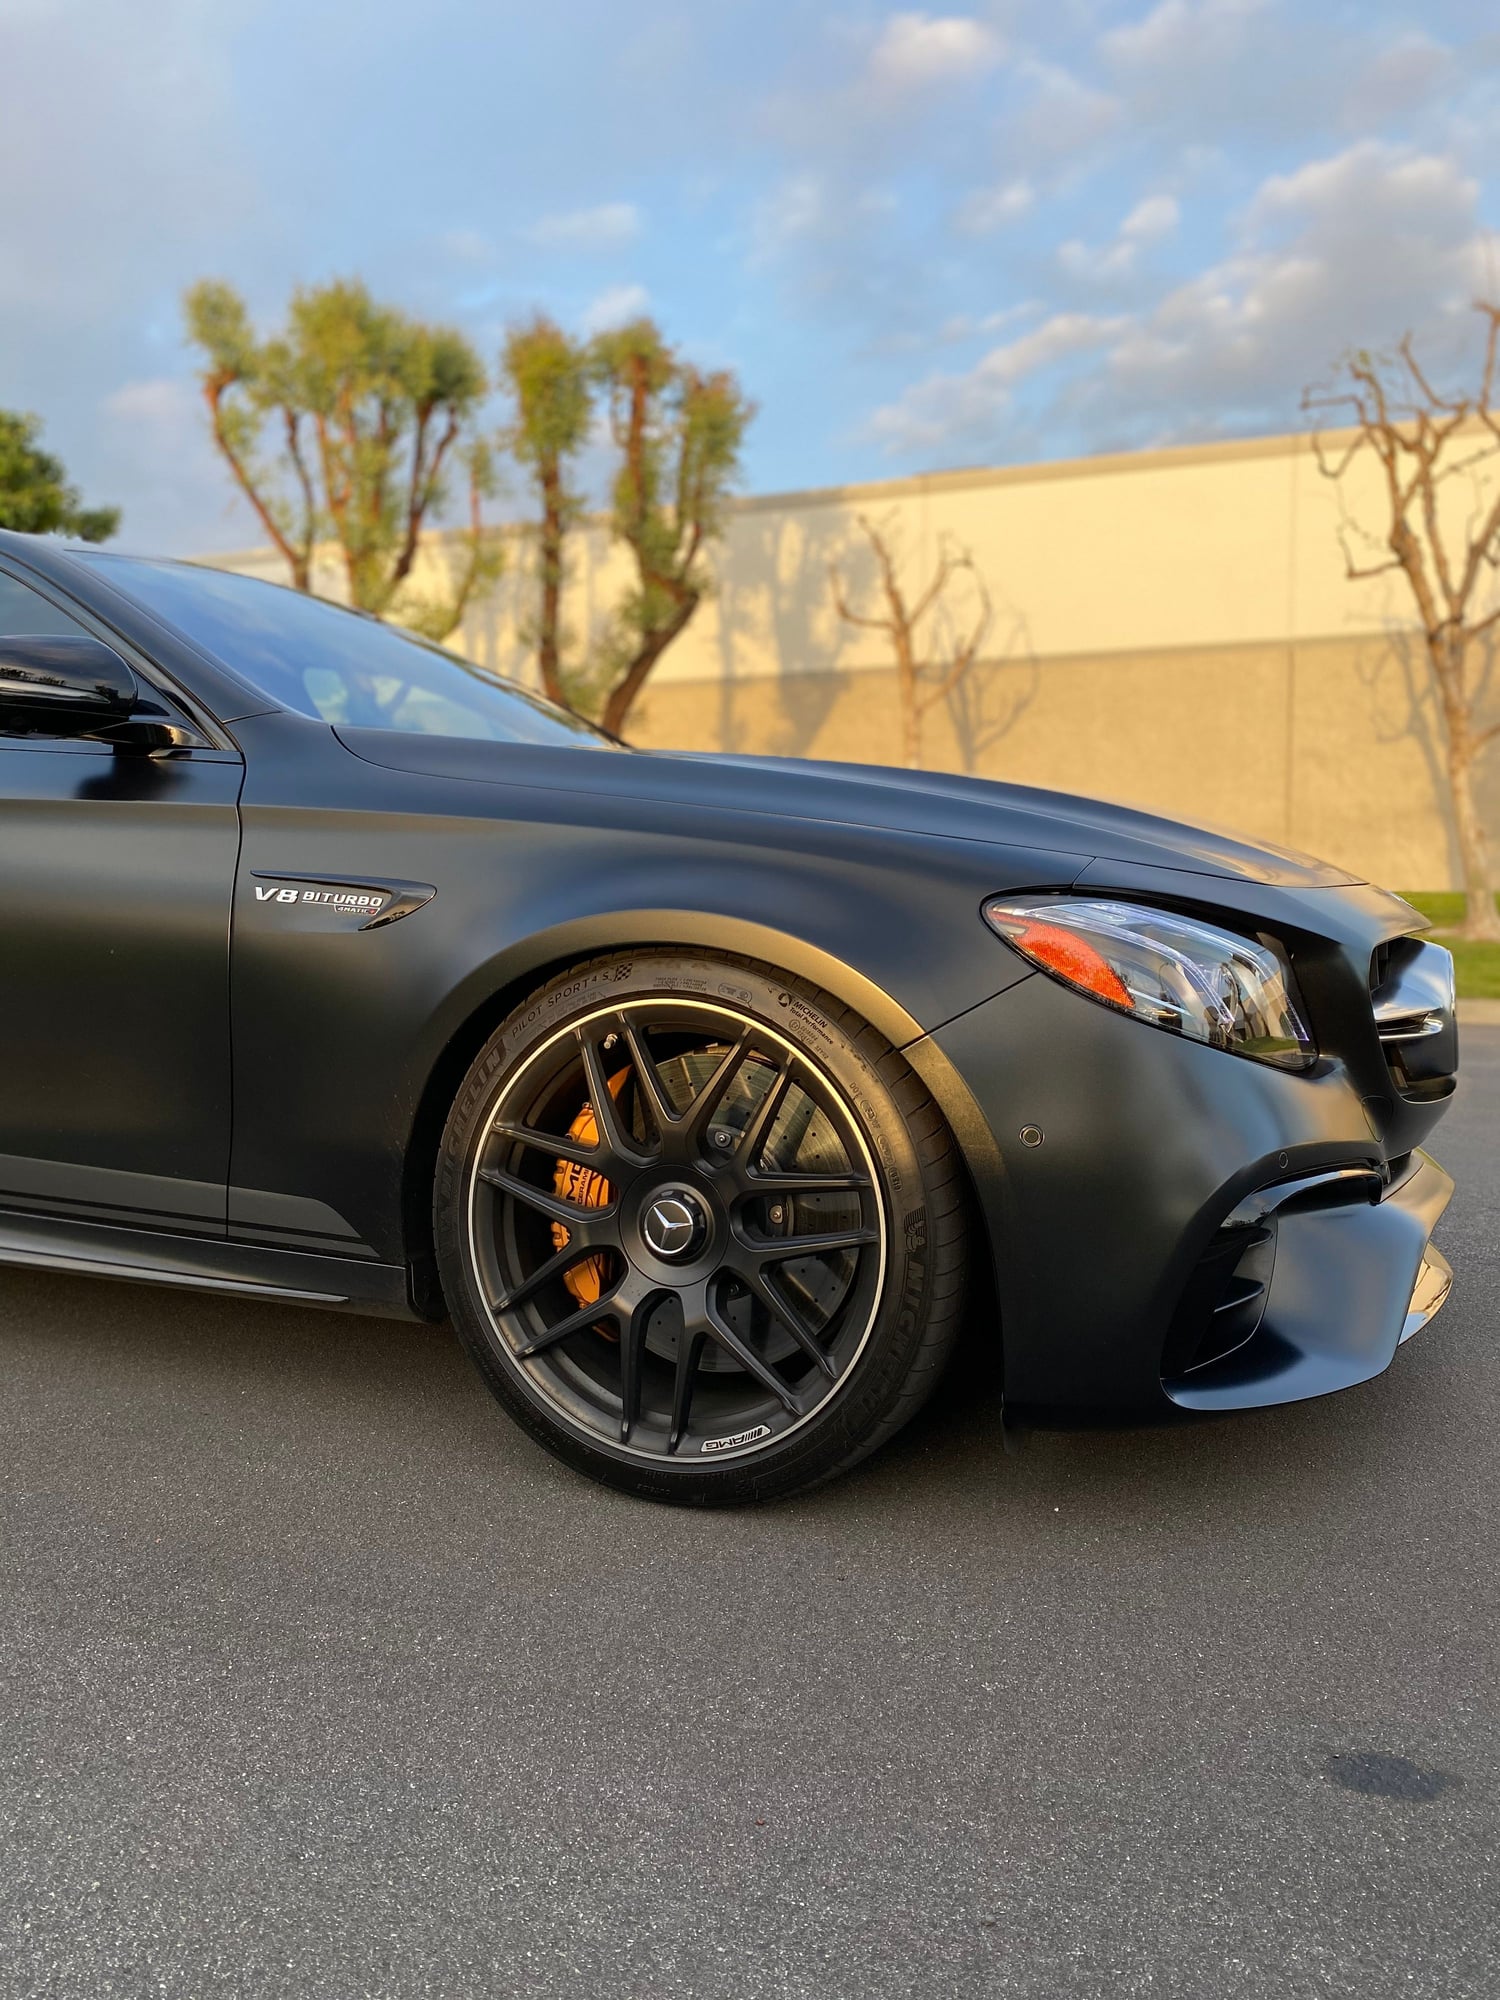 2018 Mercedes-Benz E63 AMG S - 2018 MERCEDES E63S EDITION 1 - Used - Rowland Heights, CA 91748, United States